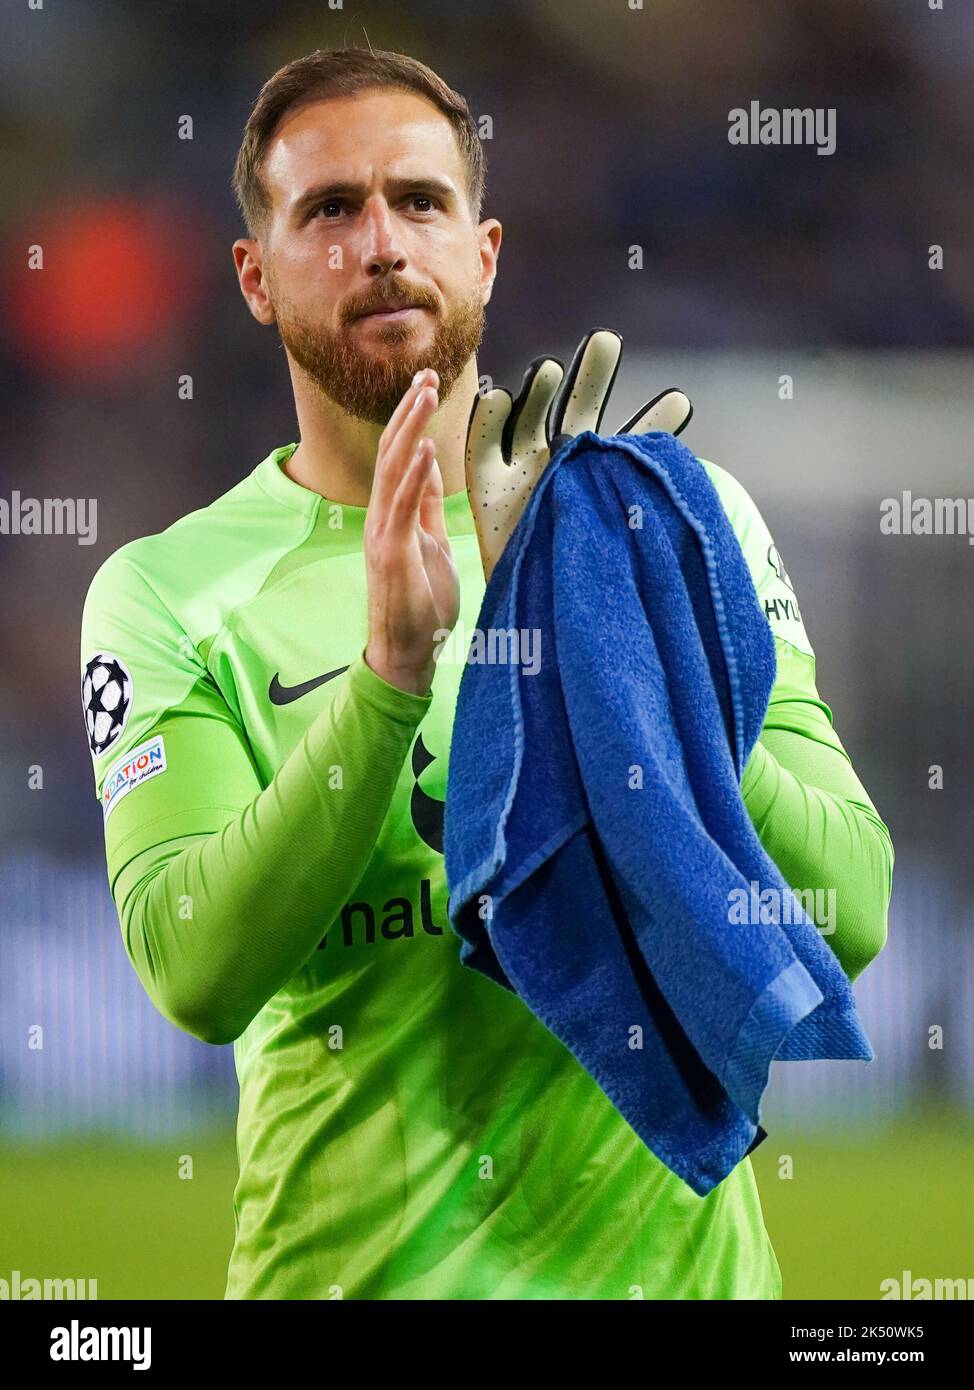 BRUGGES, BELGIUM - OCTOBER 4: Jan Oblak of Atletico Madrid looks dejected and applauds for the fans after the Group B - UEFA Champions League match between Club Brugge KV and Atletico Madrid at the Jan Breydelstadion on October 4, 2022 in Brugges, Belgium (Photo by Joris Verwijst/Orange Pictures) Stock Photo